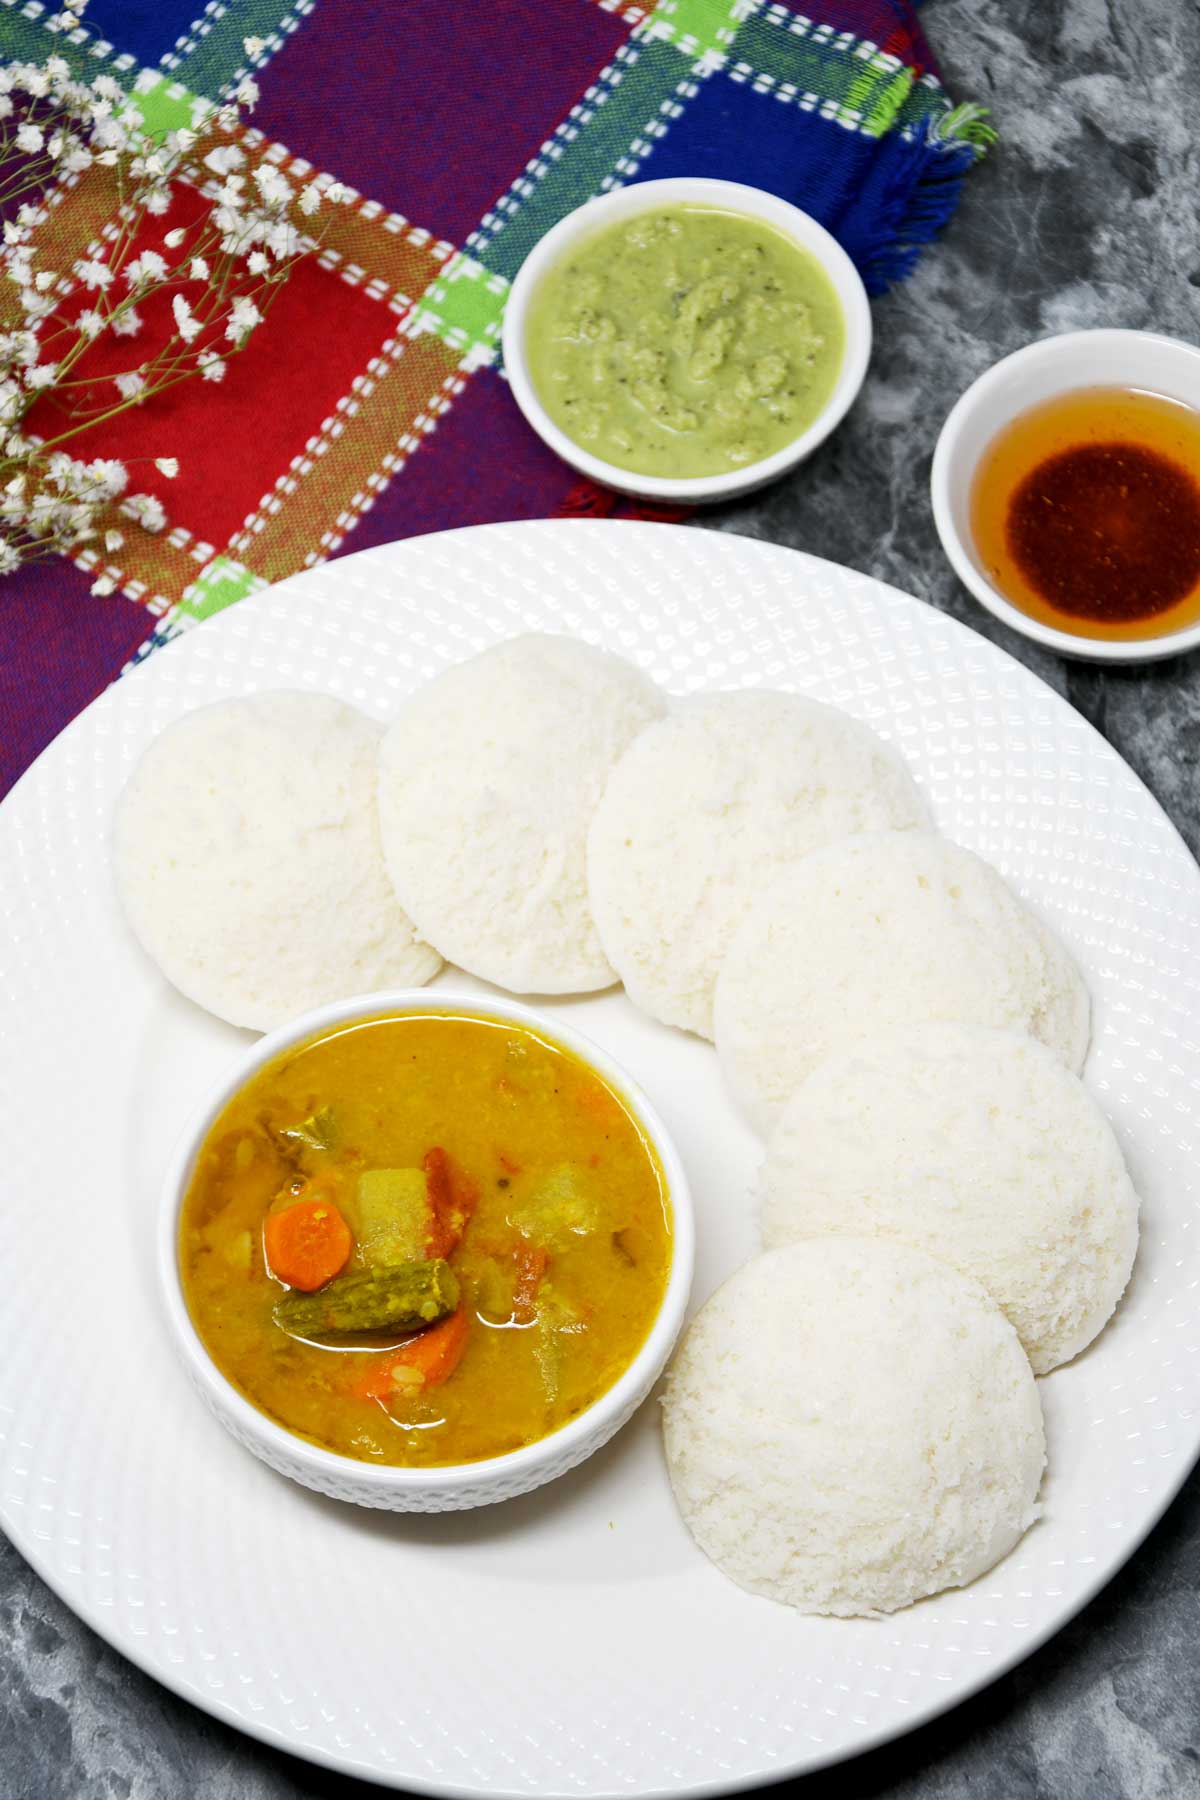 Idlis served in a plate with a bowl of sambhar and chutney.